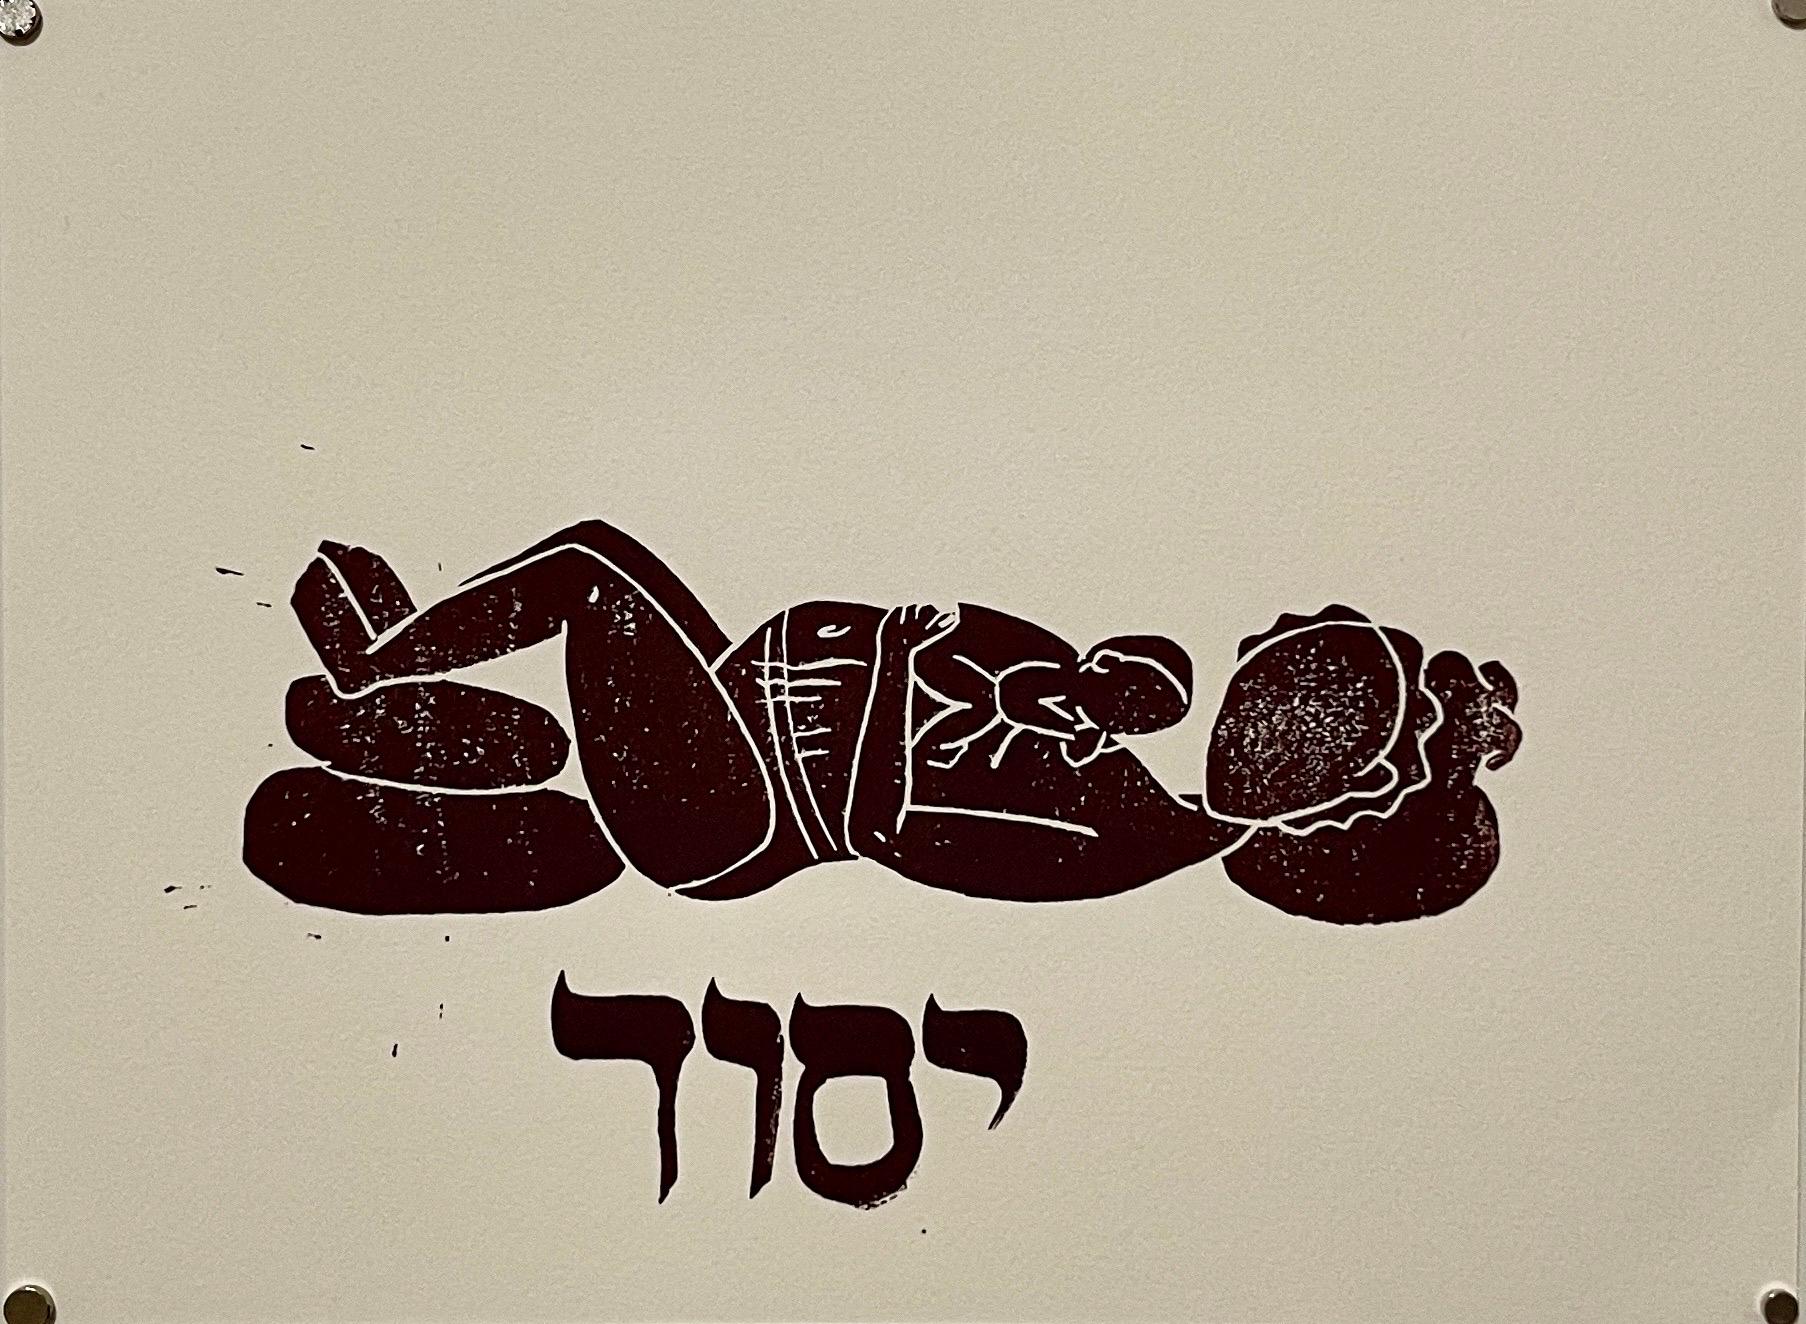 Basya Wuensch
Sefirot, Yesod (Foundation)
Mother and Baby
2023
Hand printed color linocut on cold pressed watercolor paper
Hand signed and numbered
12 X 9 inches

Basya Wuensch Reiter is an accomplished contemporary female Chassidic artist who was